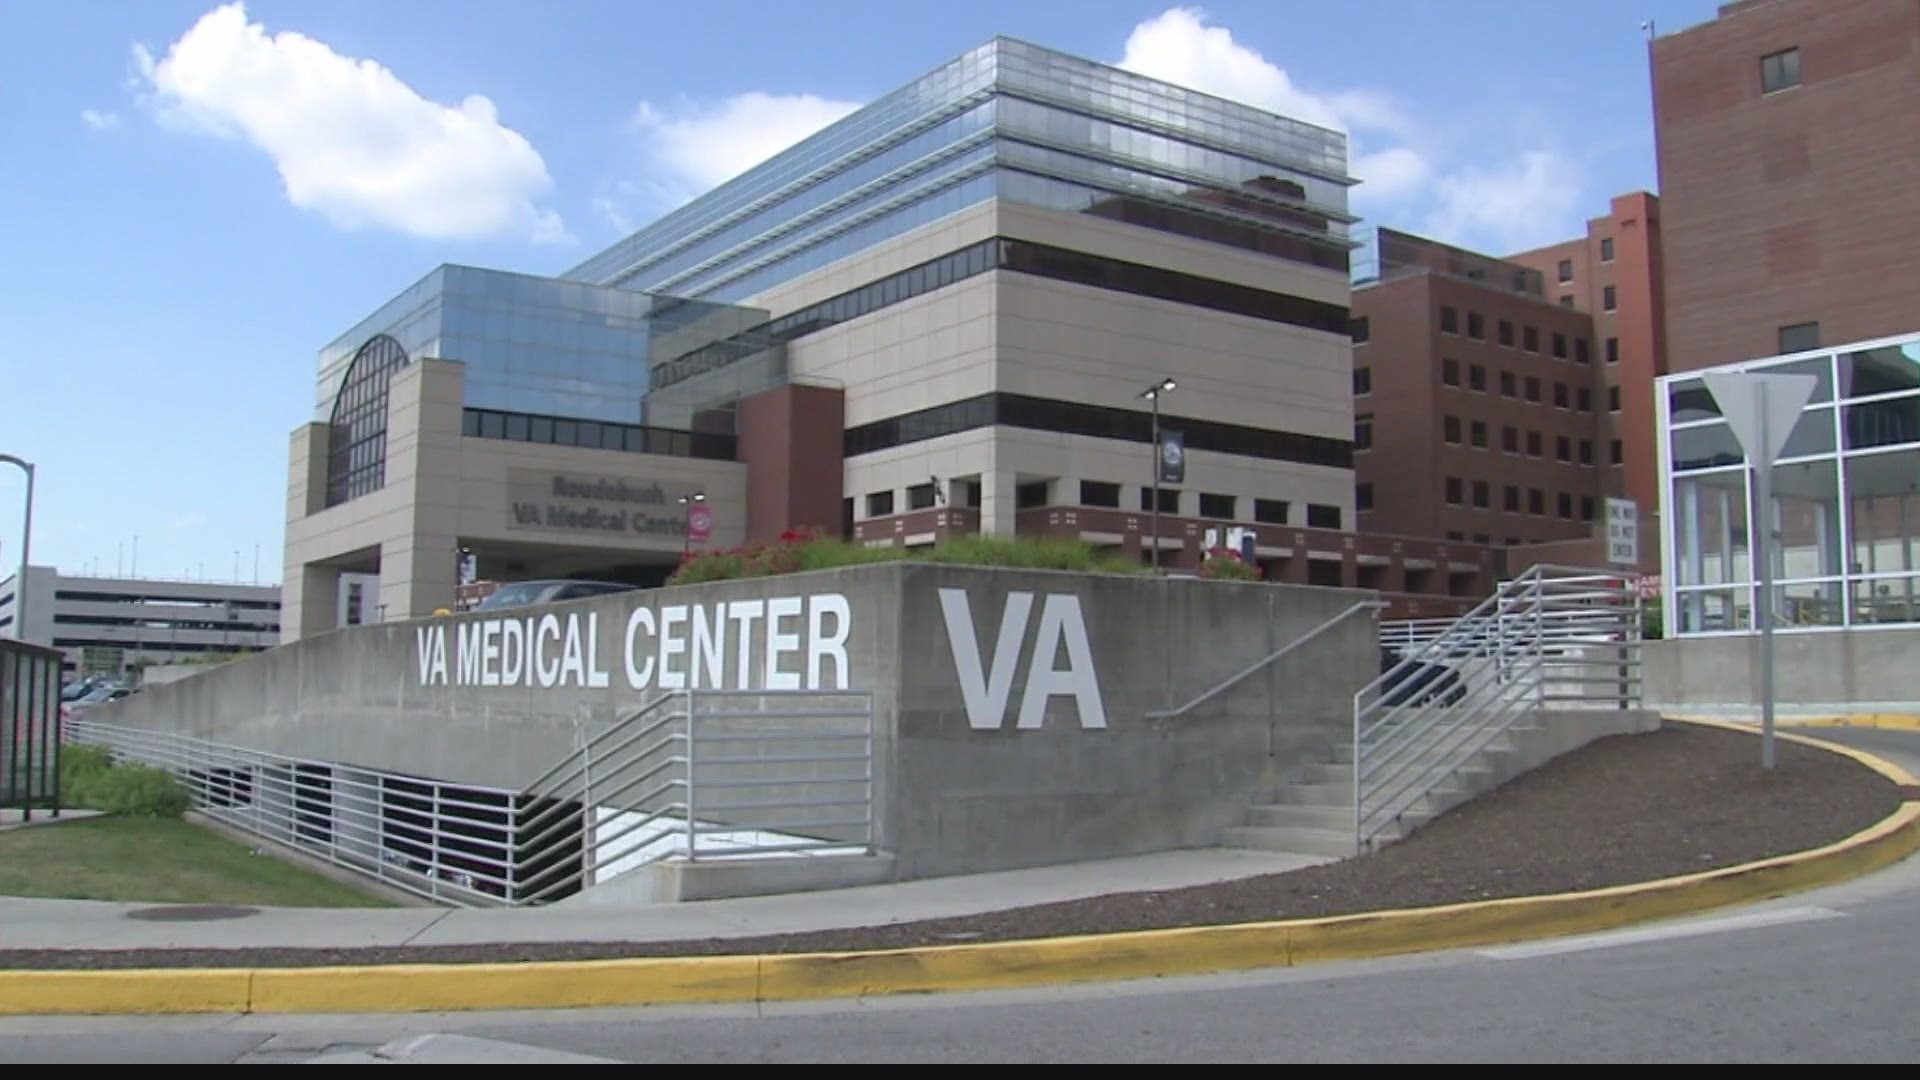 The Roudebush VA in Indianapolis is working to reduce employee infections as COVID-19 numbers spike.